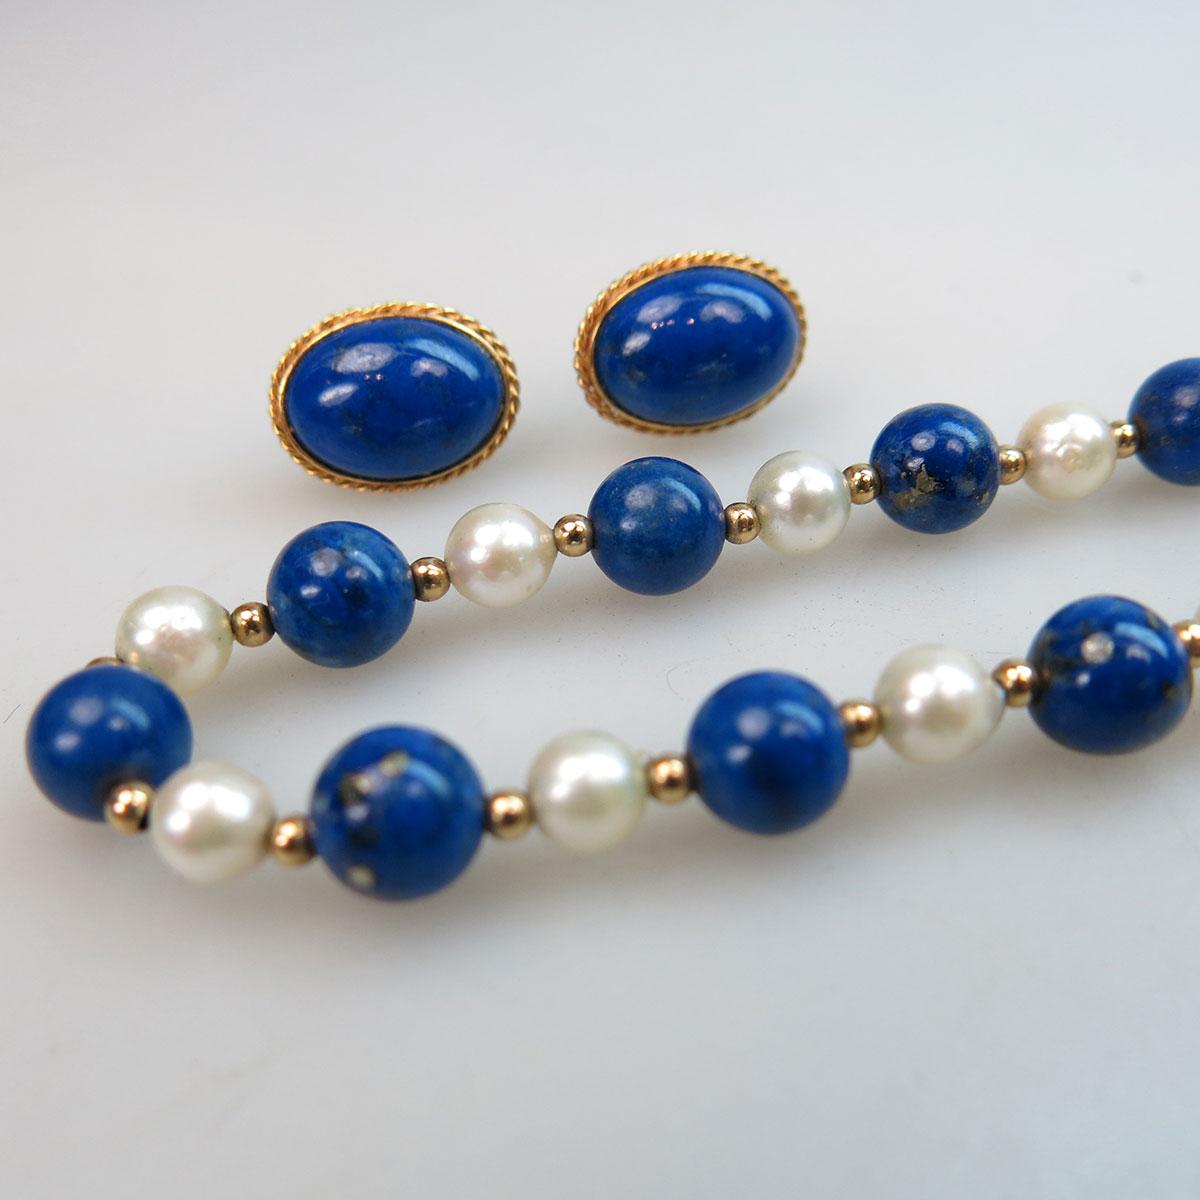 Single Strand Lapis Bead And Cultured Pearl Necklace